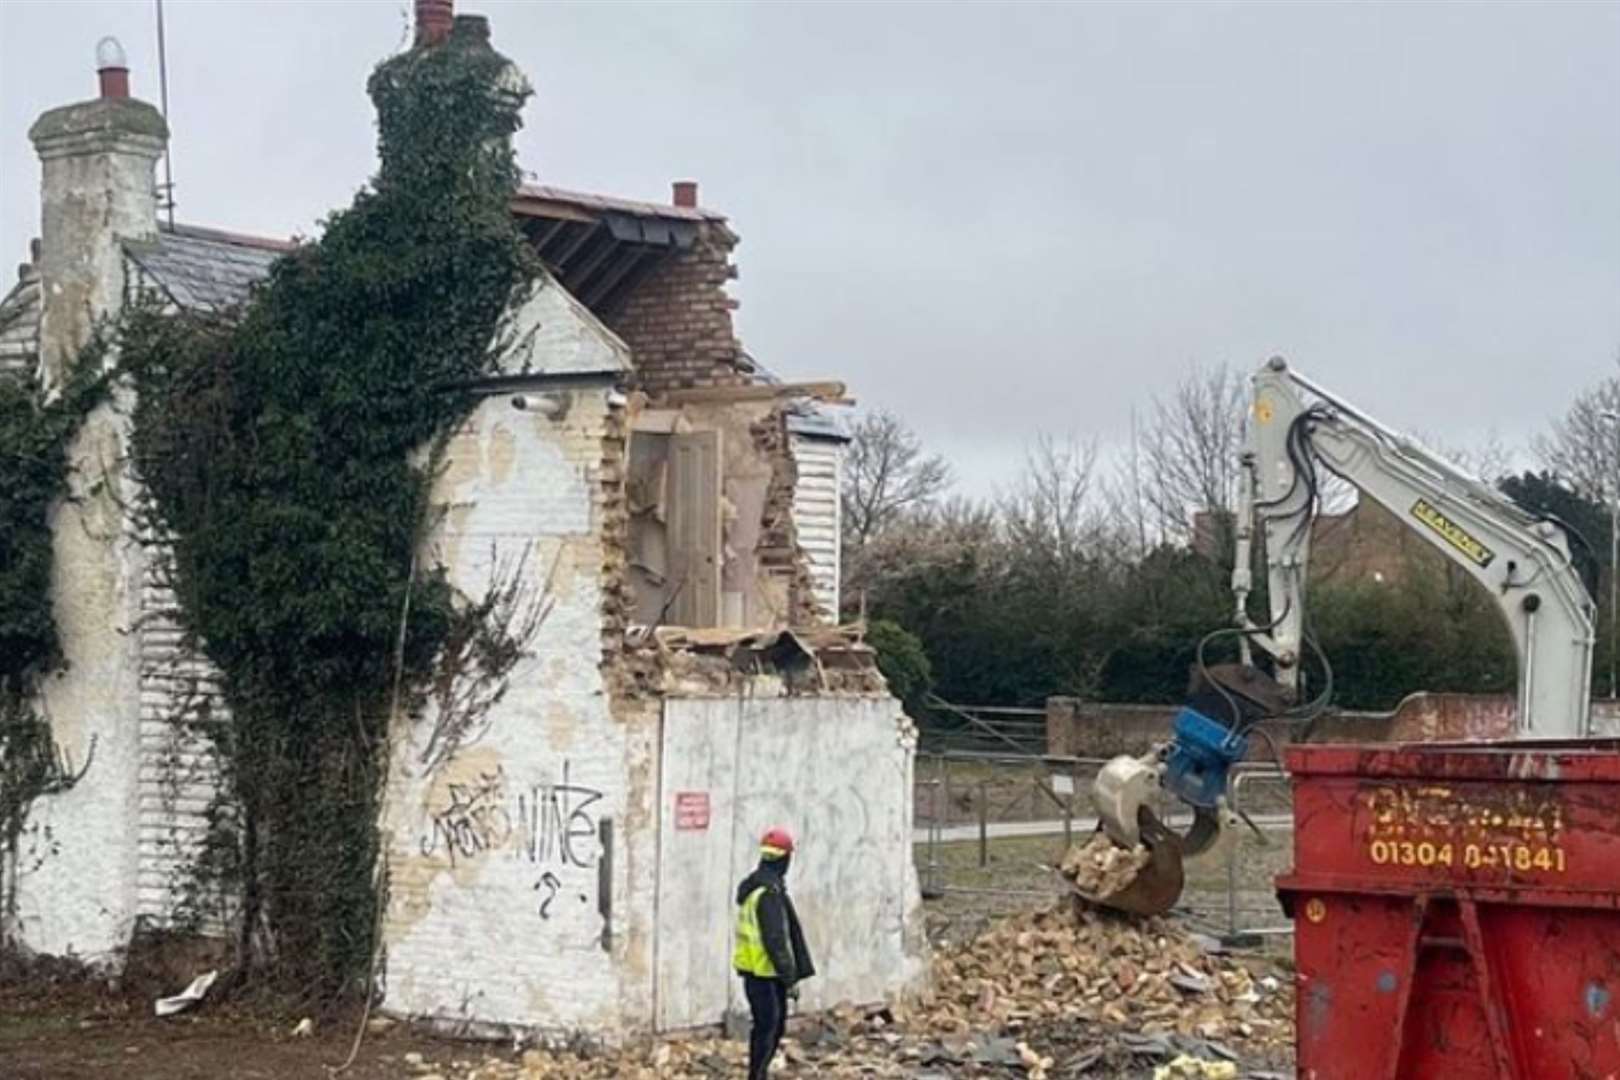 The artwork is on the side of a derelict farmhouse at Blacksole Farm, near Herne Bay. Picture: Banksy/Instagram